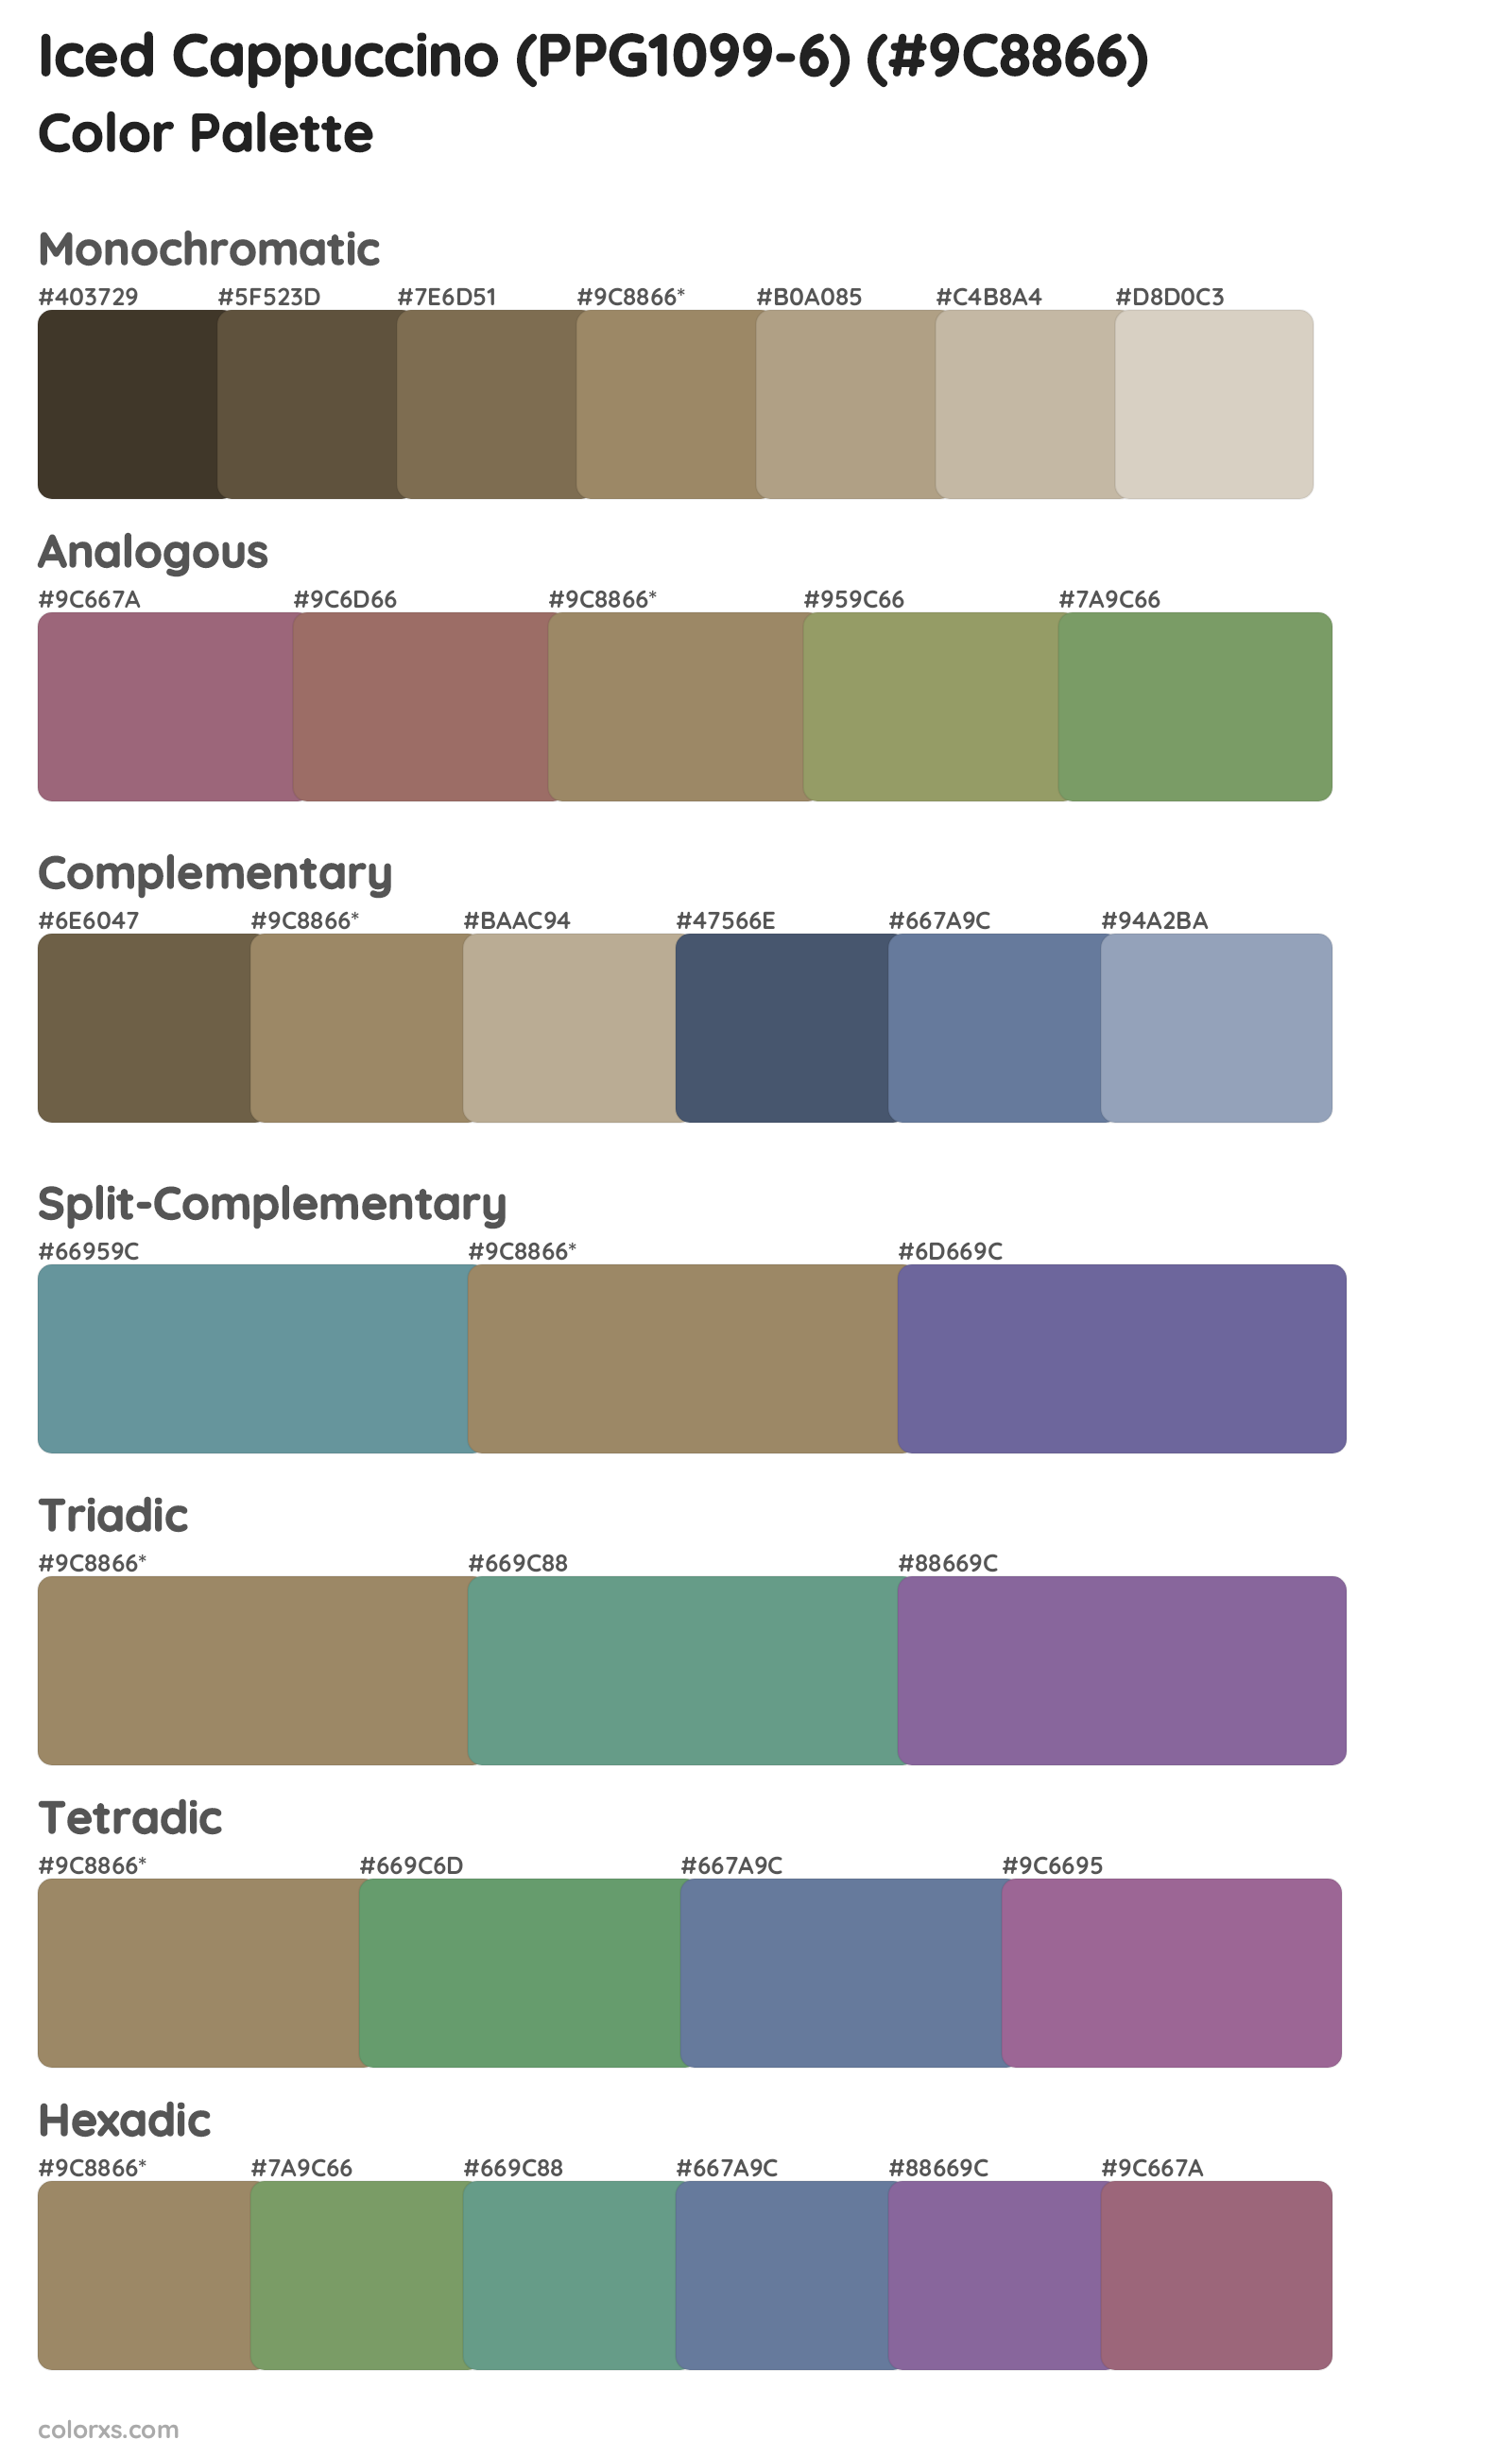 Iced Cappuccino (PPG1099-6) Color Scheme Palettes